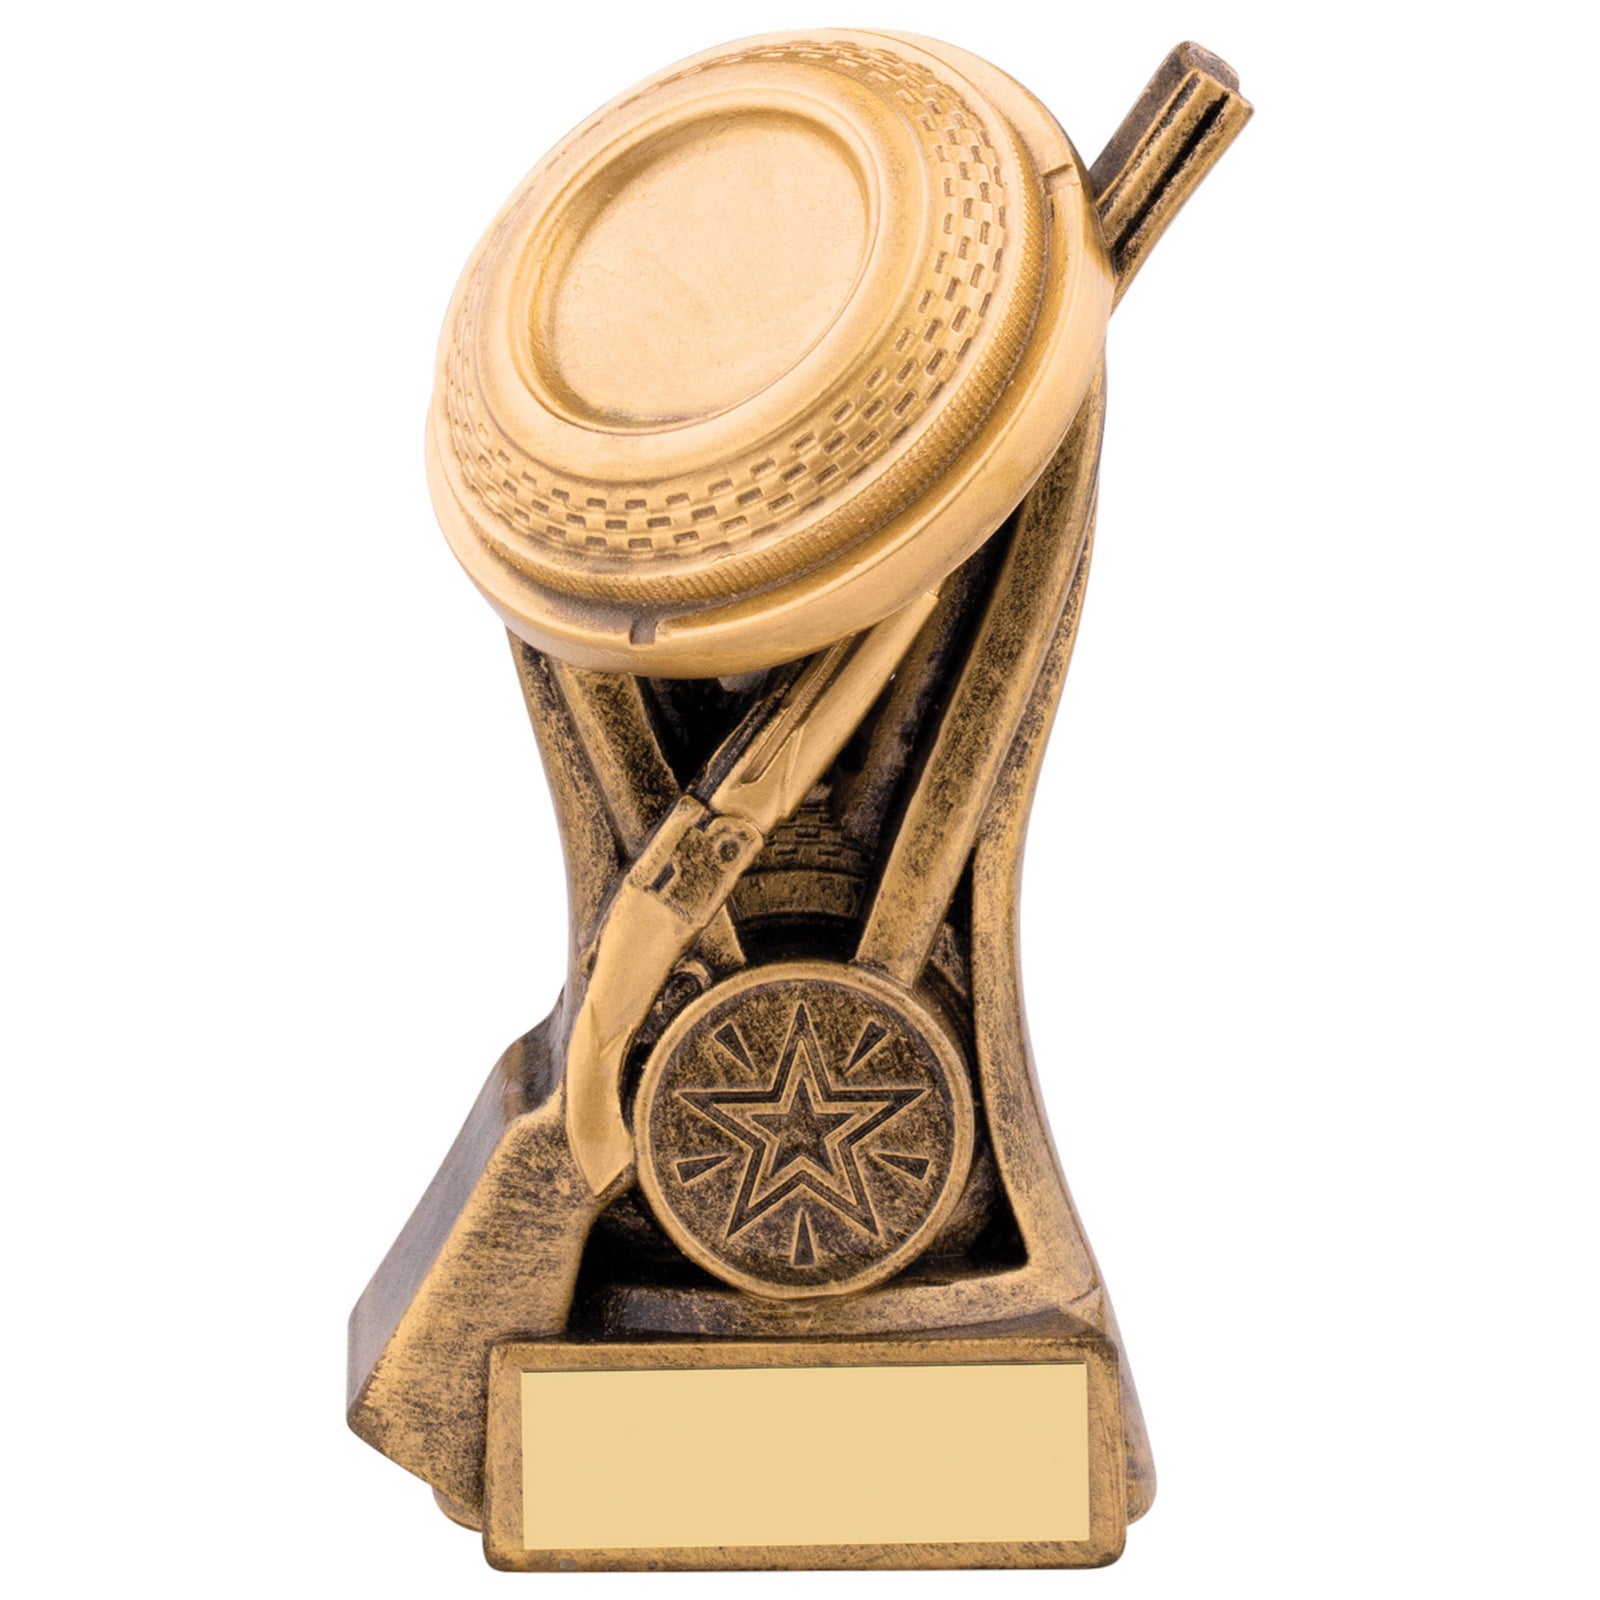 Clay Shooting Trophy - Available with Engraving and Custom 1